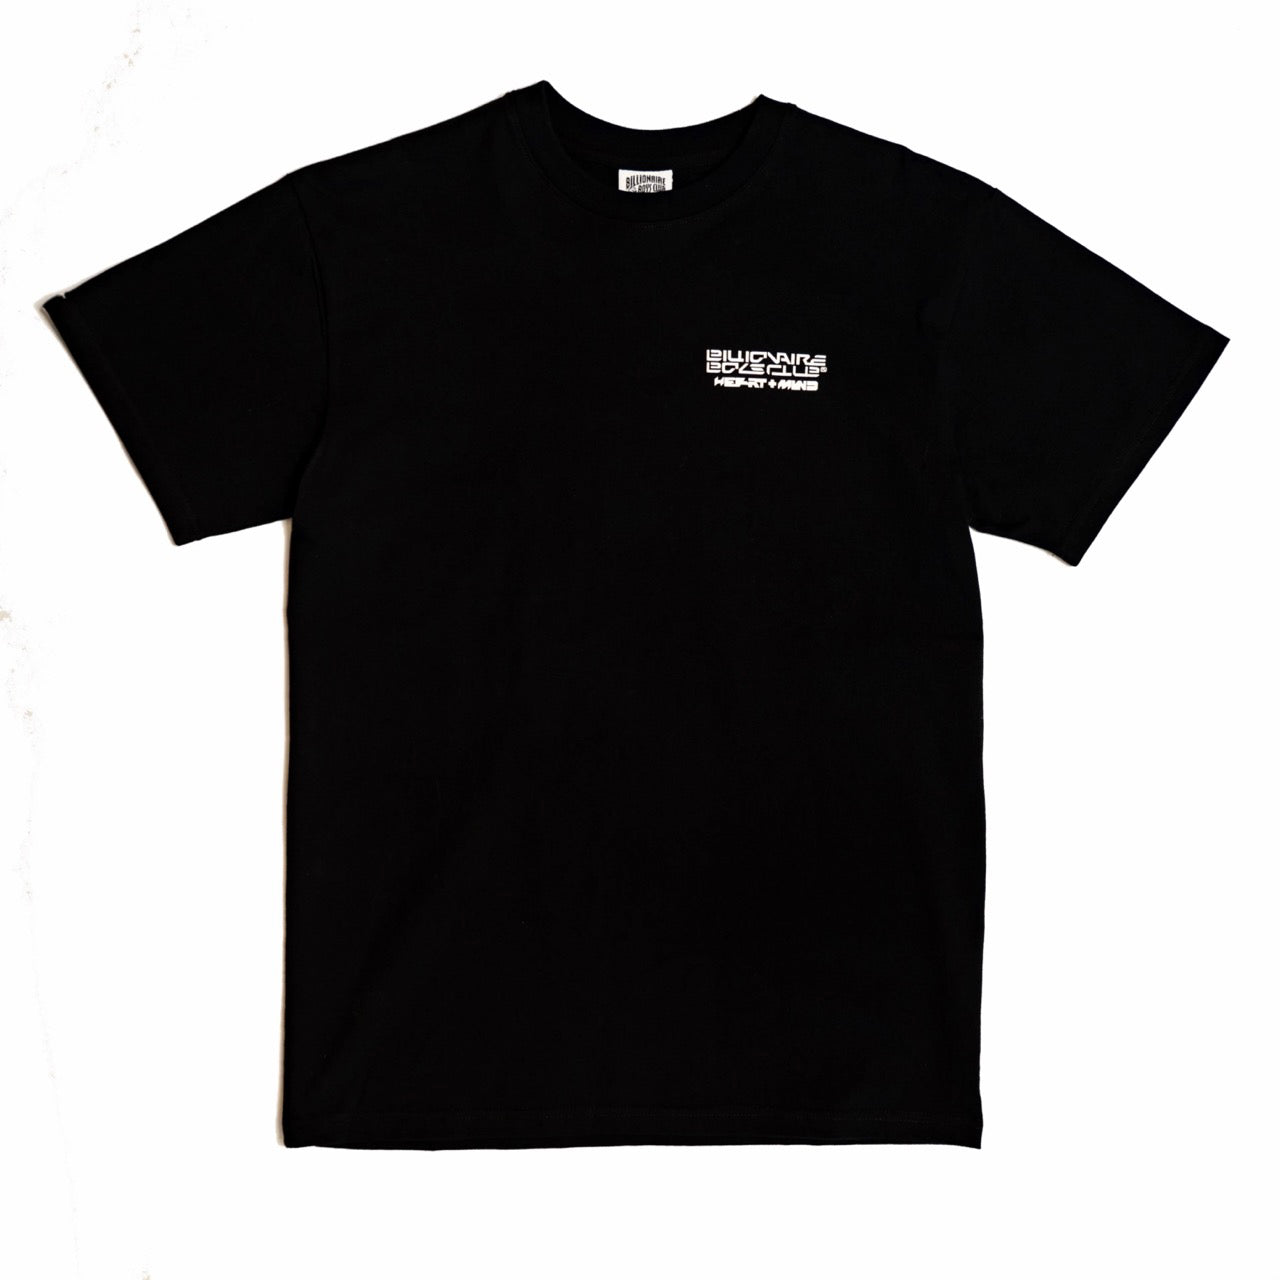 Wolves S/S Tee